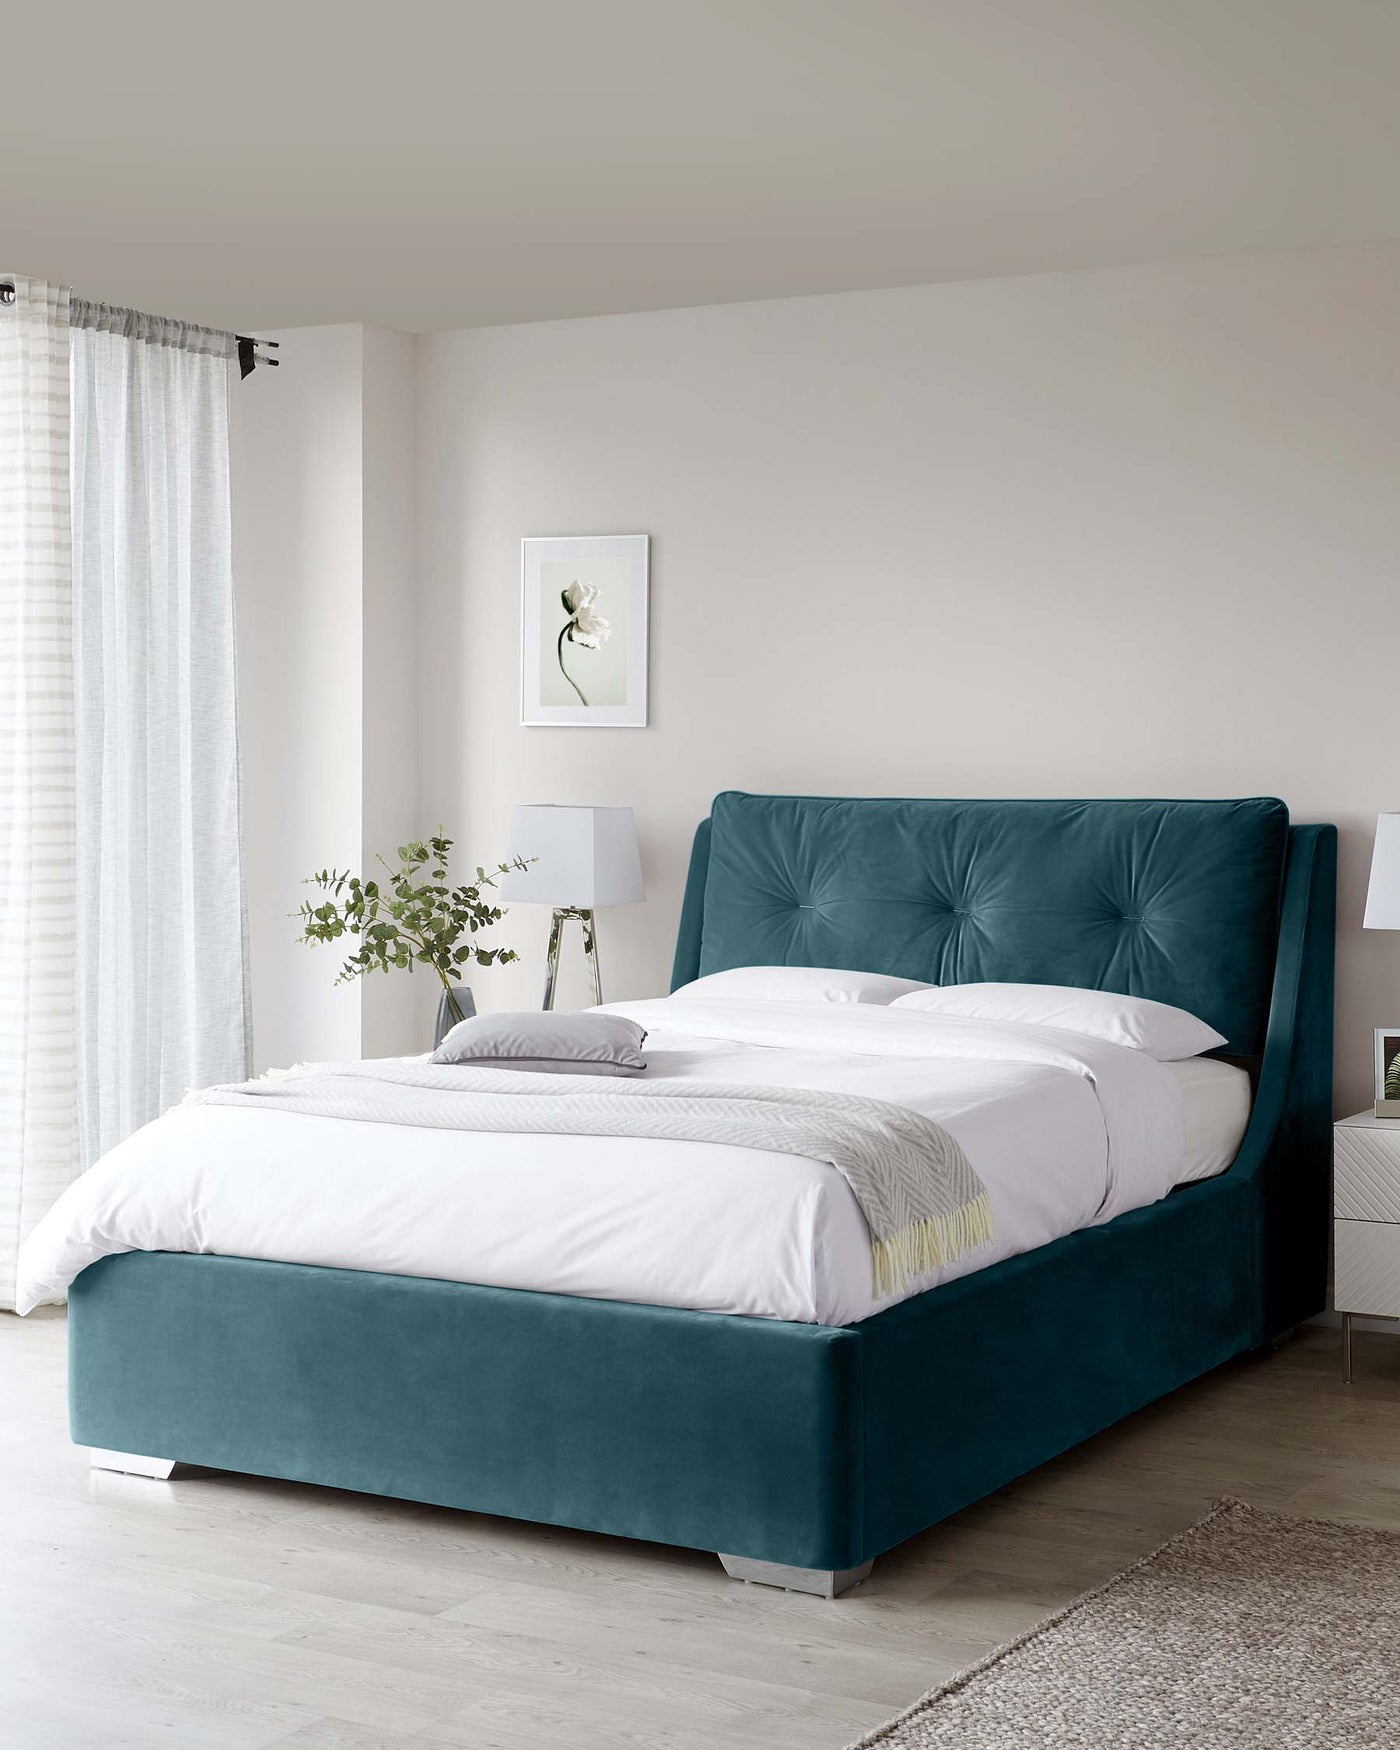 Elegant teal upholstered bed with a tufted headboard and a matching bed base, featuring crisp white bedding and a light throw blanket with a white nightstand and modern lamp on the side.